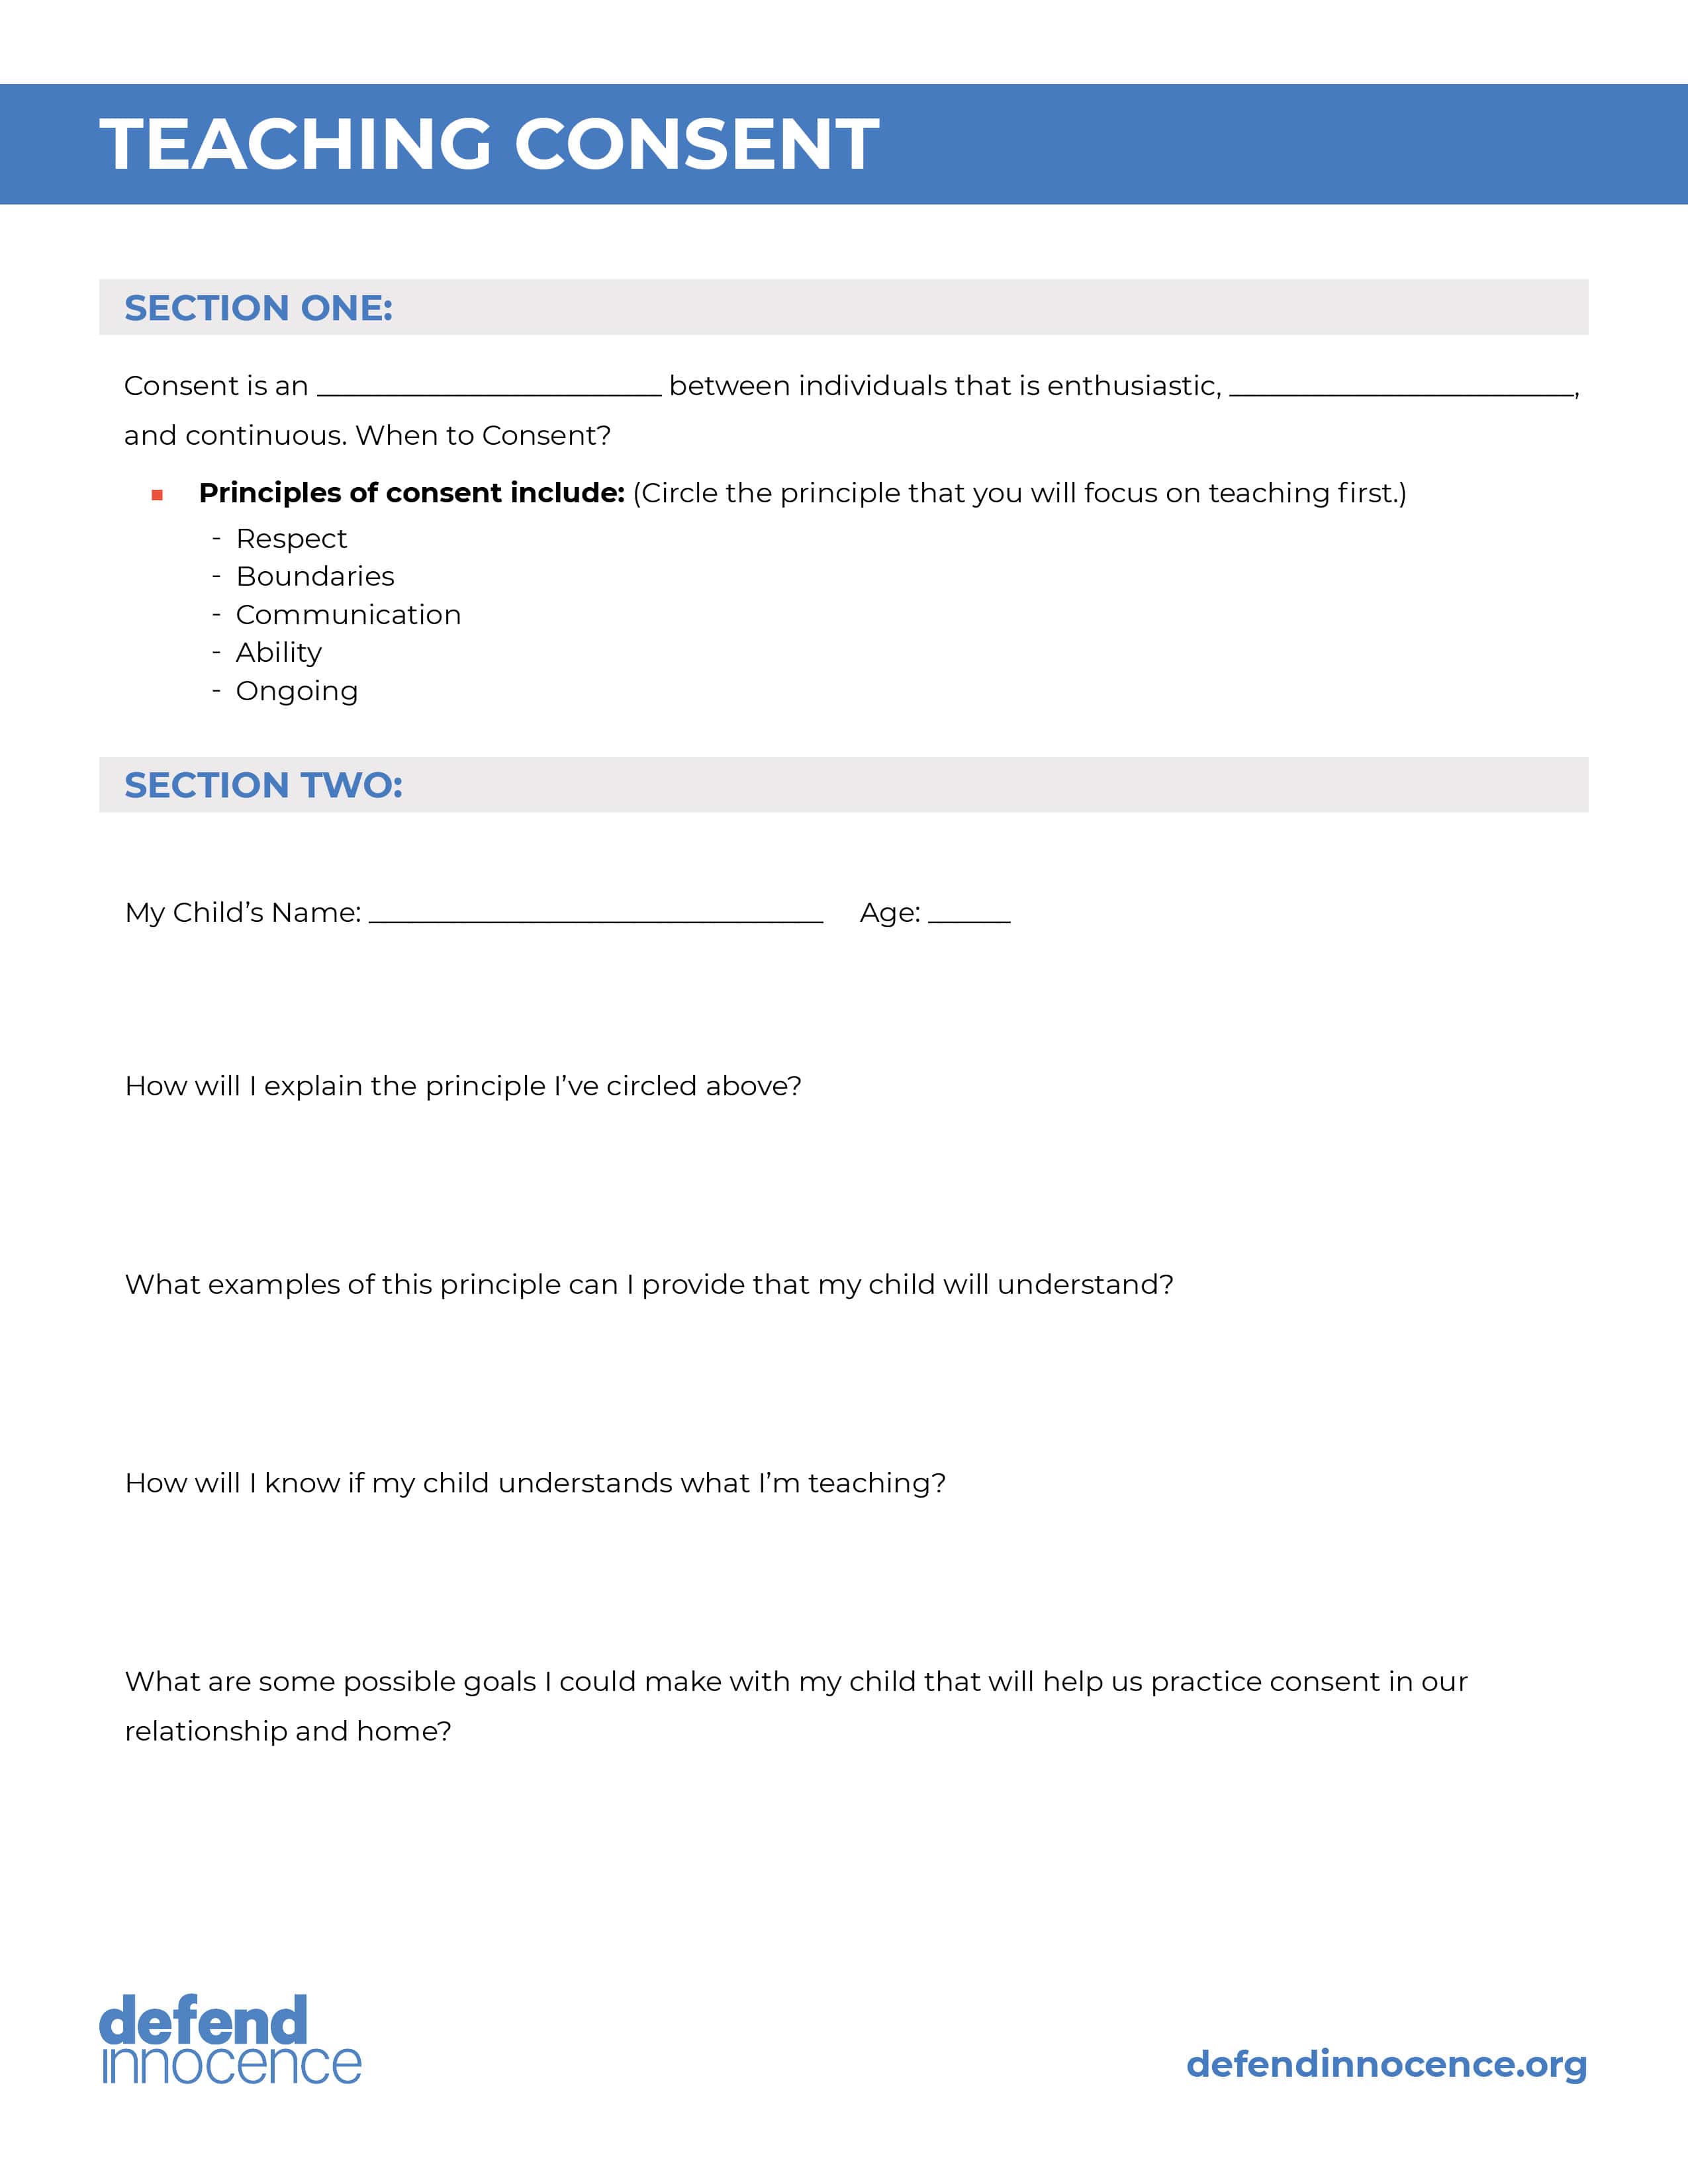 assignment worksheet 13 1 voluntary consent